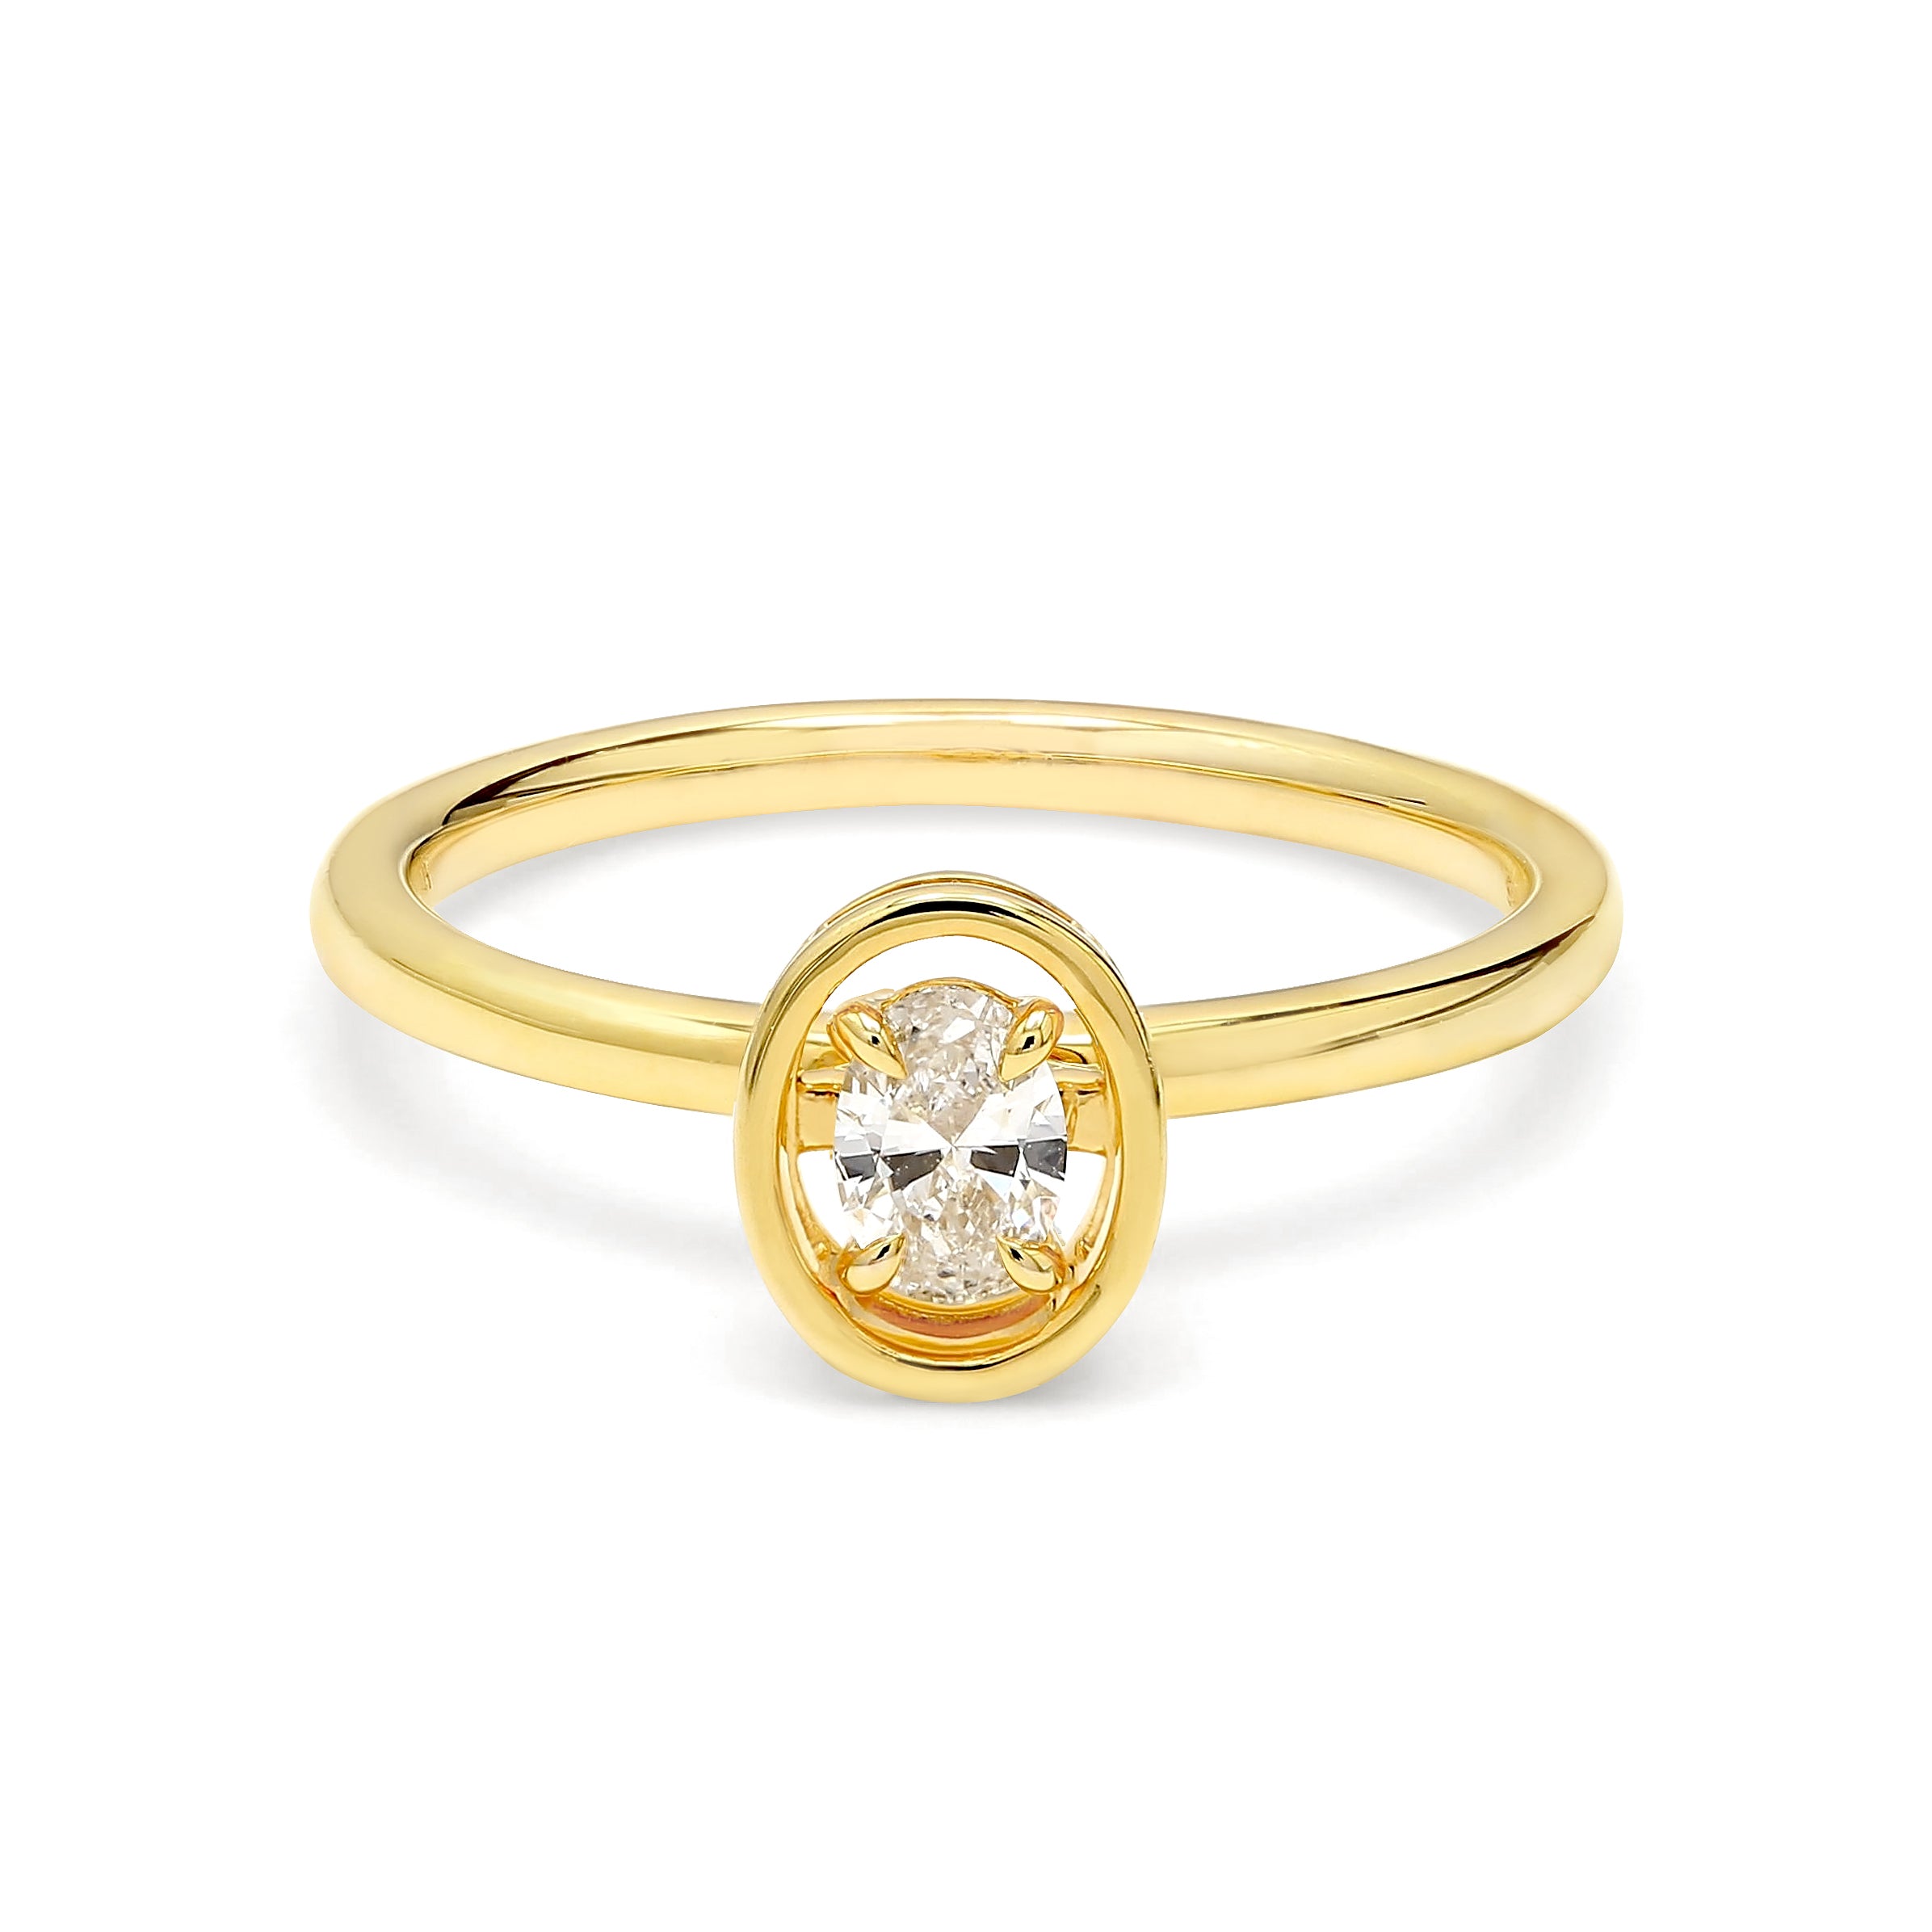 Shimansky - Saturn Oval Diamond Solitaire Ring 0.20ct crafted in 14K Yellow Gold